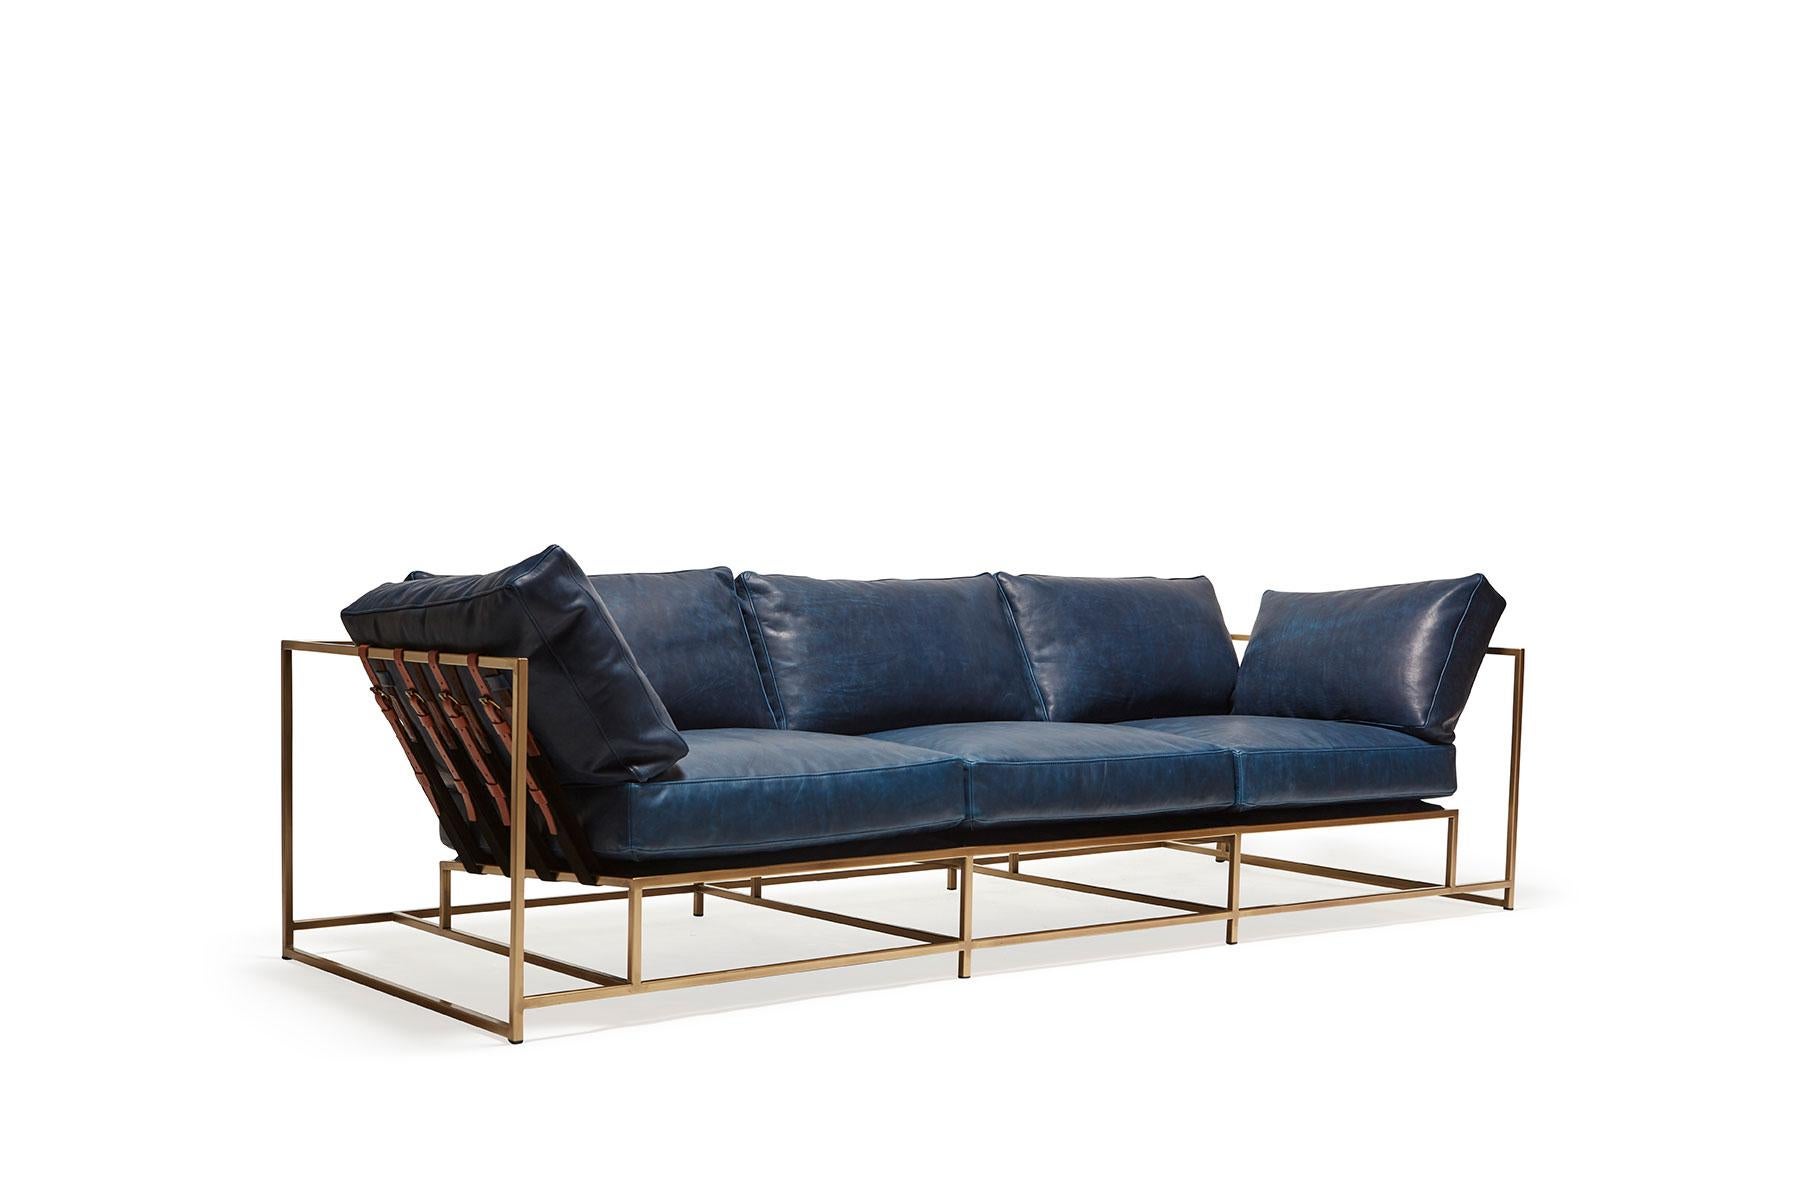 The Inheritance Sofa by Stephen Kenn is as comfortable as it is unique. The design features an exposed construction composed of three elements - a steel frame, plush upholstery, and supportive belts. The deep seating area is perfect for a relaxing